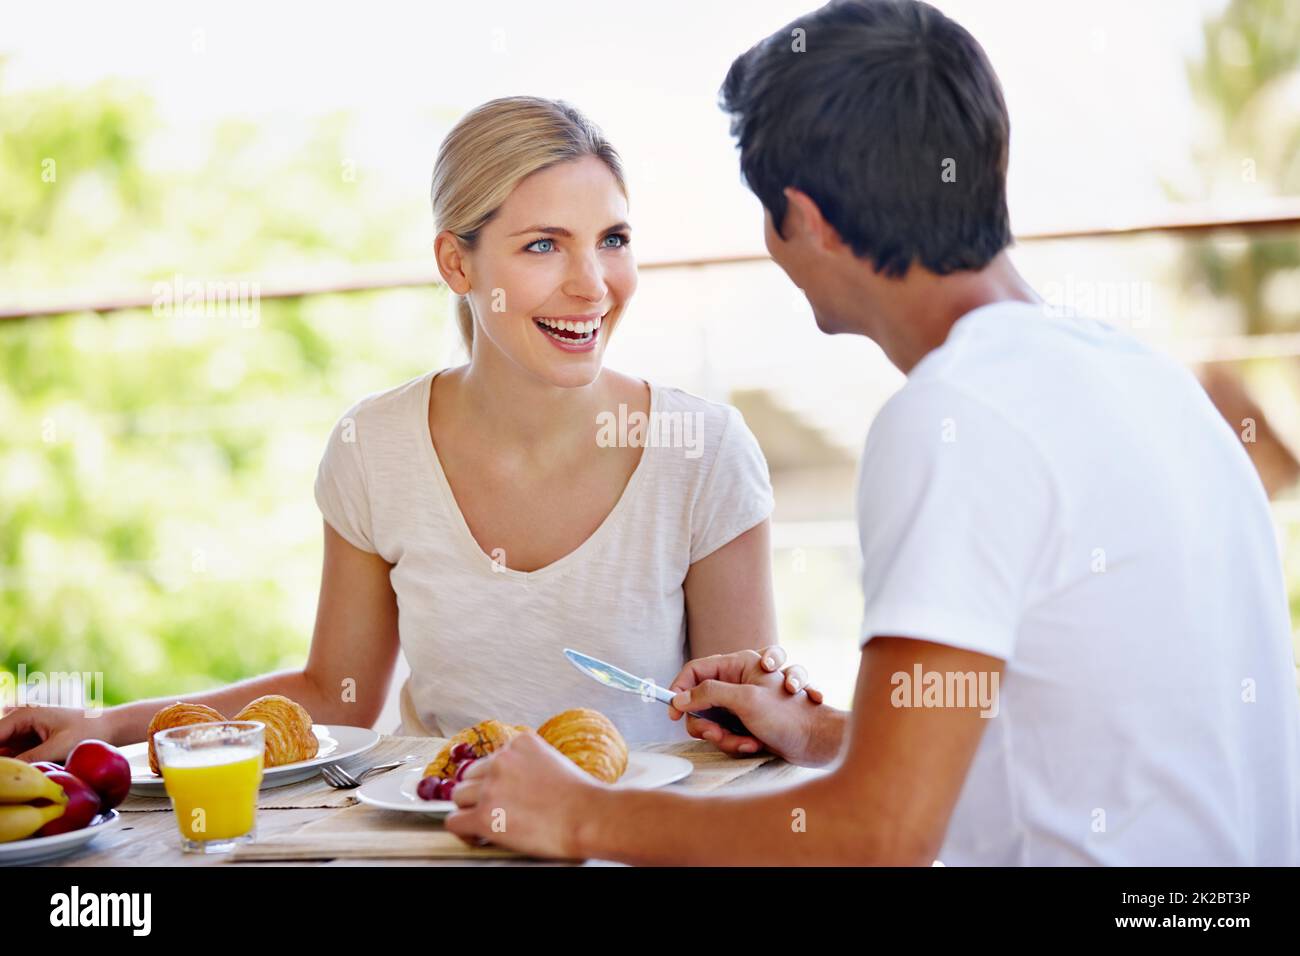 Enjoying their stay at the bed and breakfast. Shot of a happy young couple eating breakfast together on the patio at home. Stock Photo